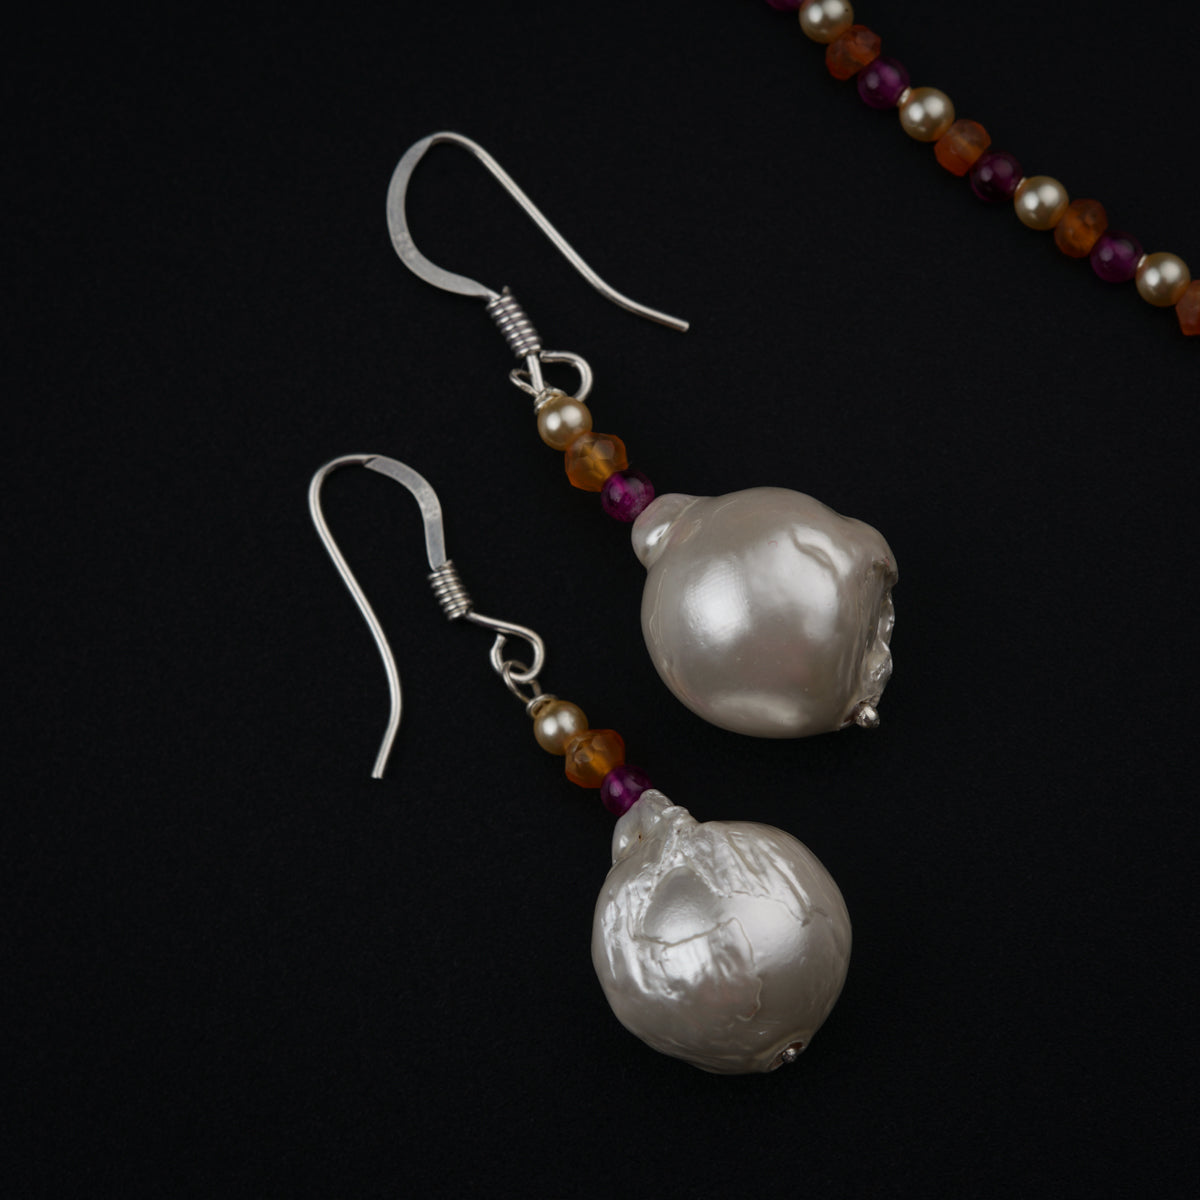 a pair of earrings with pearls and beads